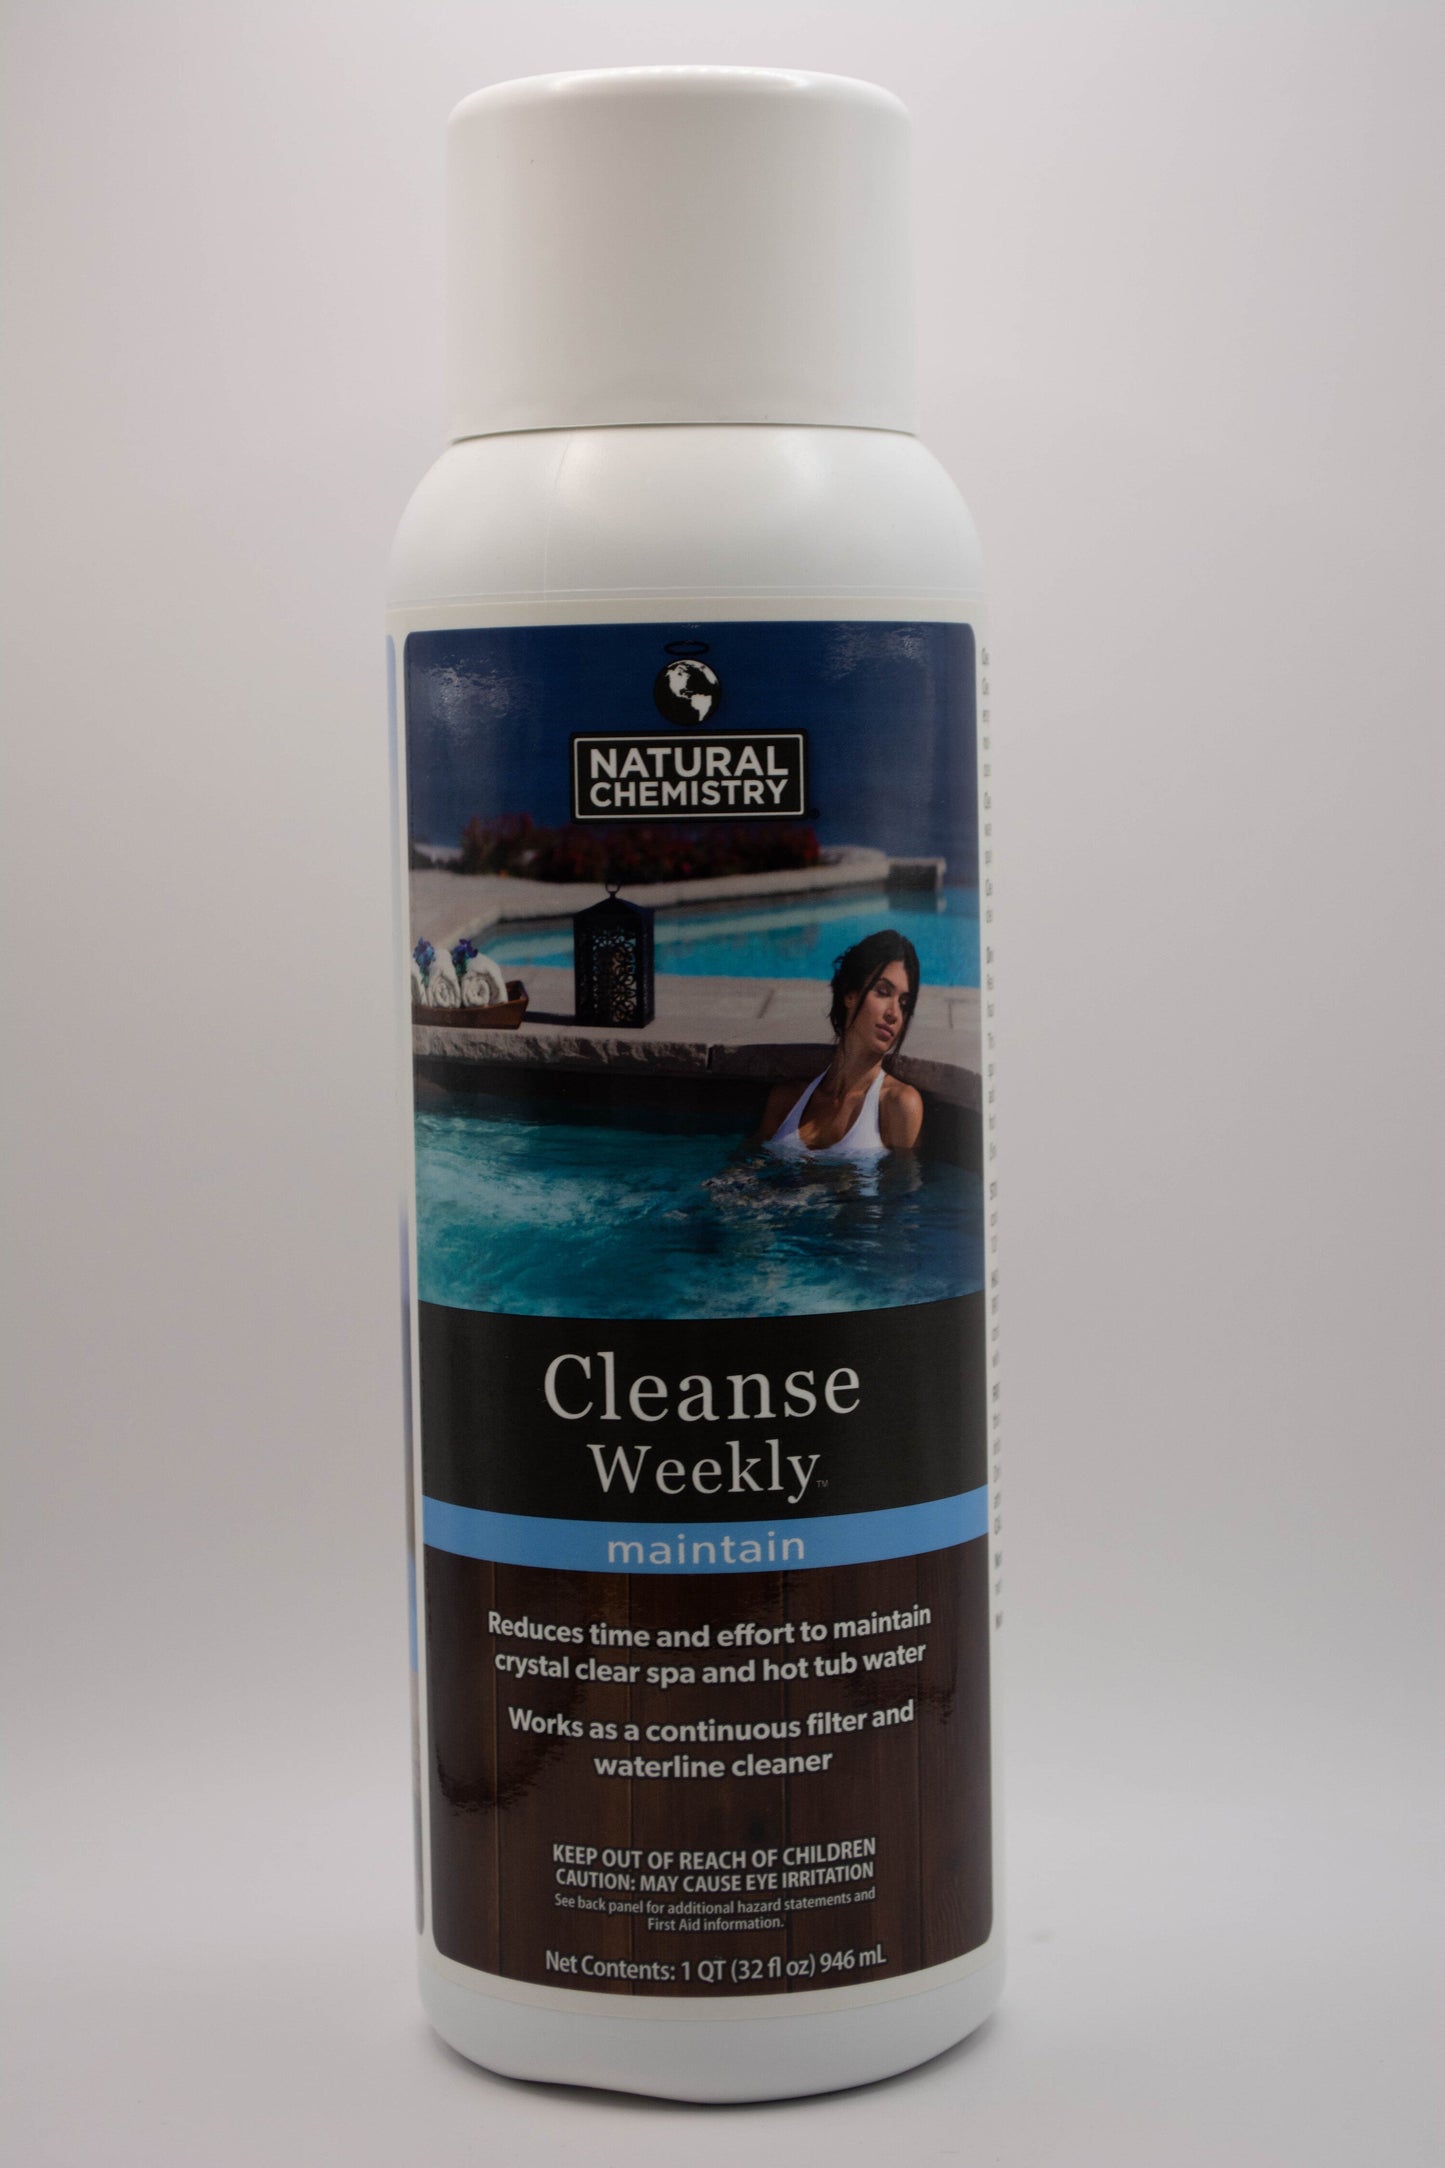 Cleanse Weekly 'maintain'